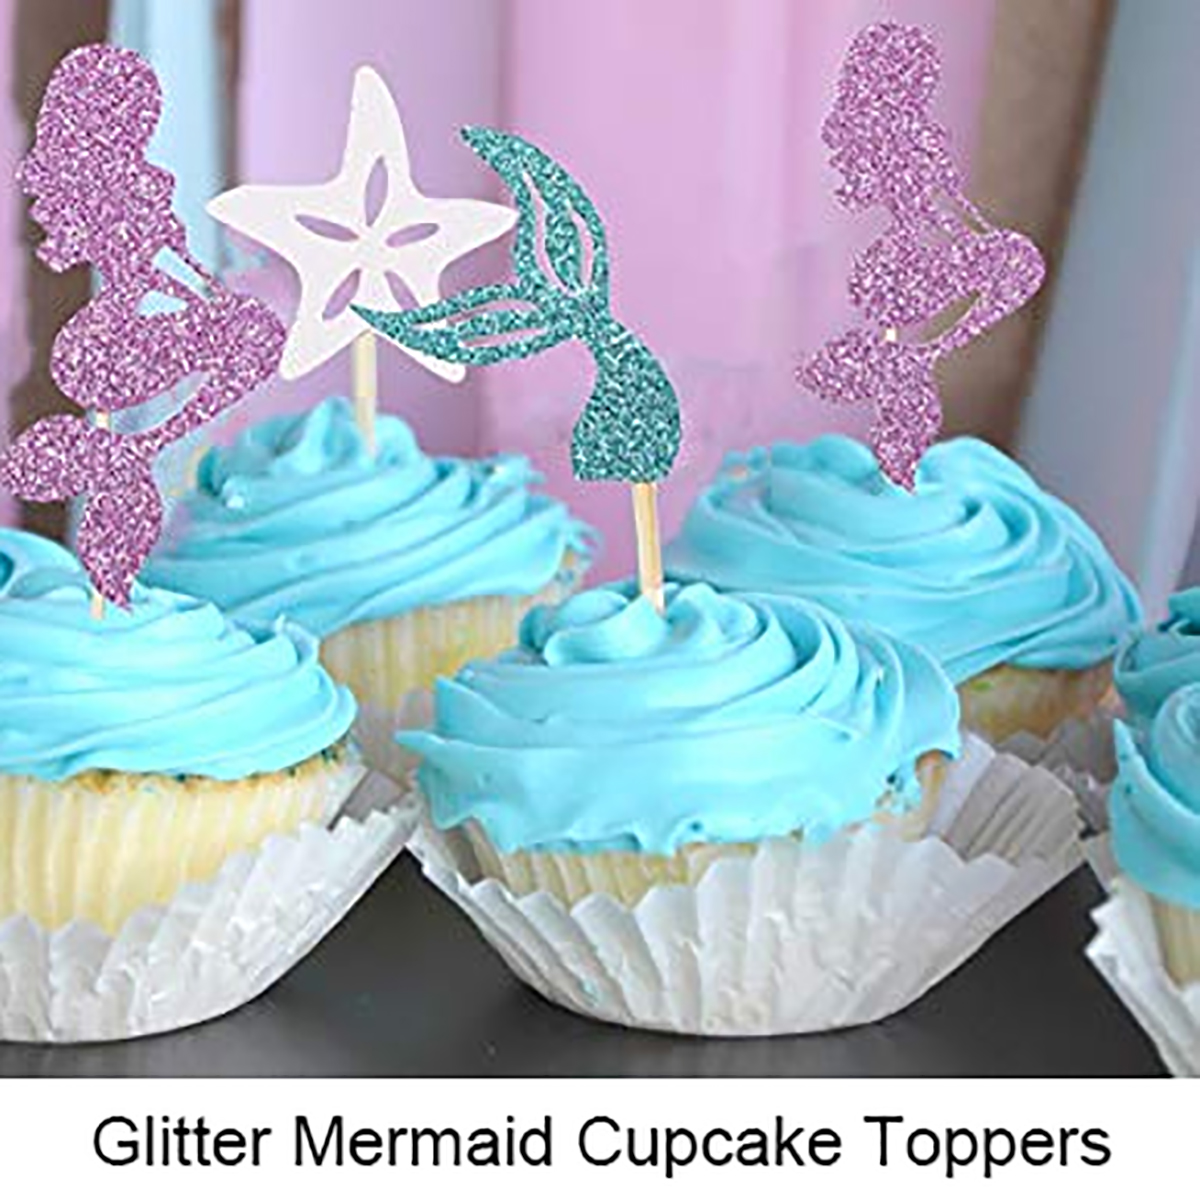 Mermaid party decorations birthday baby shower decorations